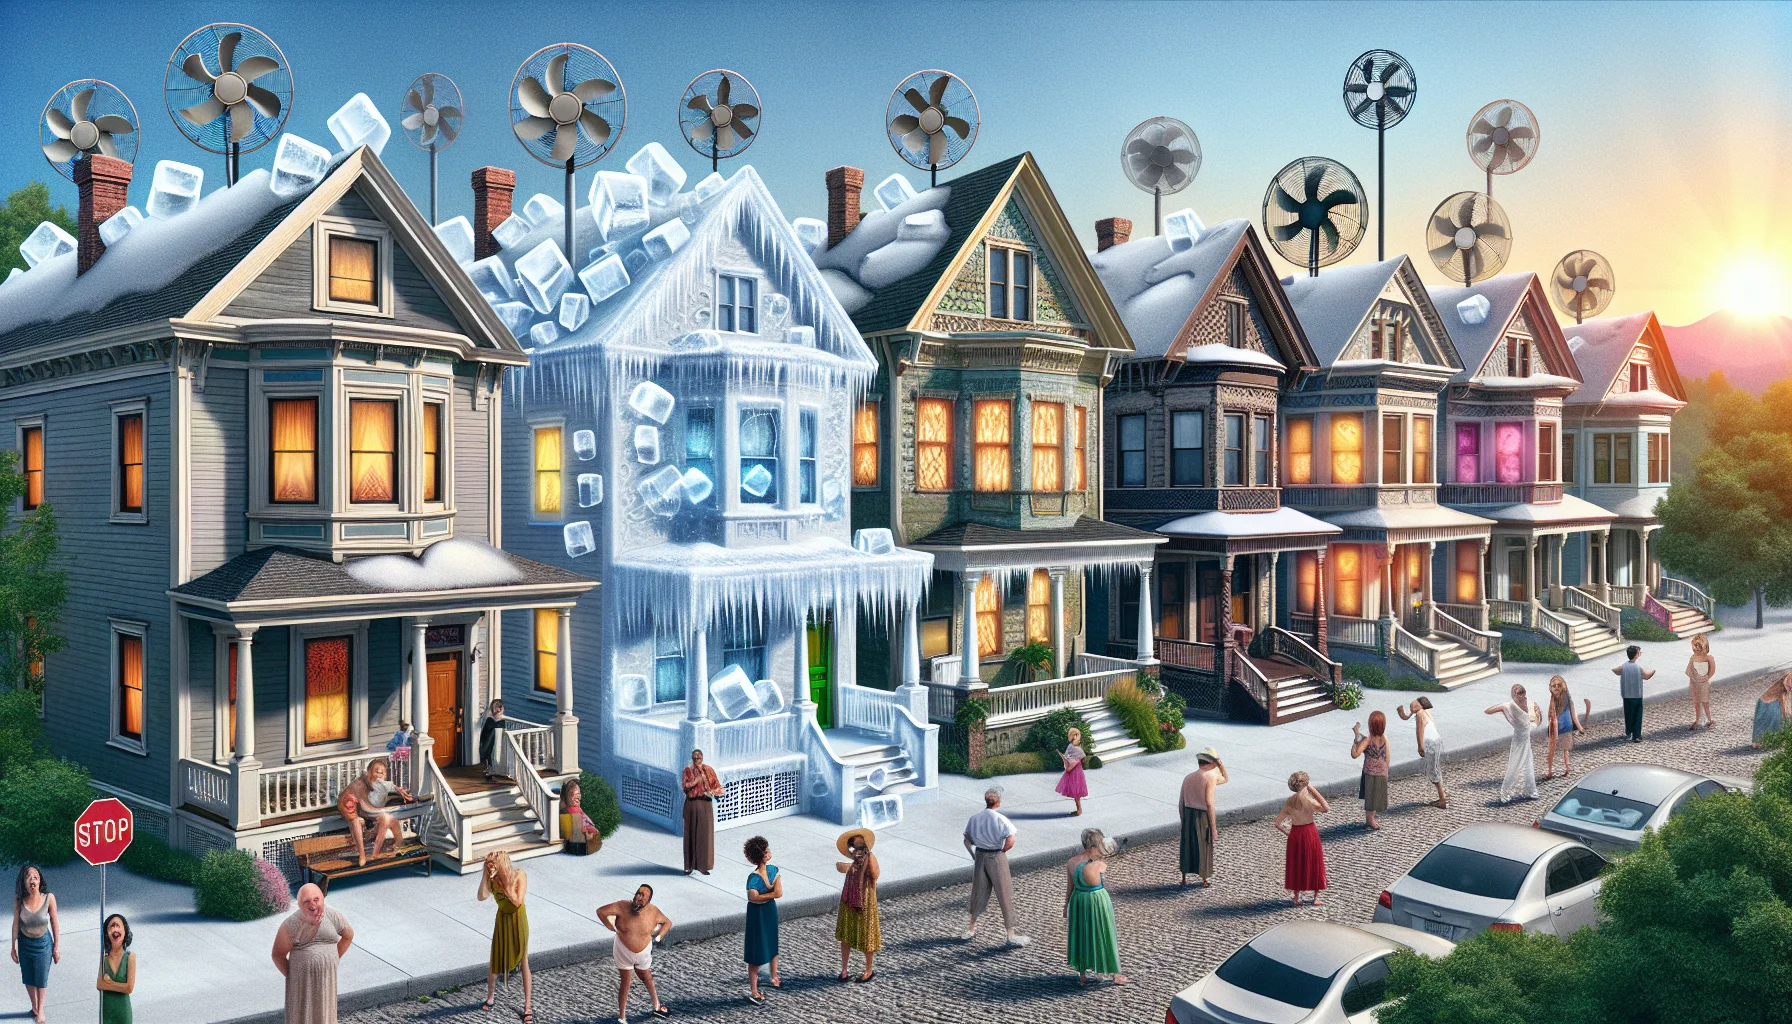 Generated a humorous, realistic image portraying the concept of a housing market cooling down. The scene takes place in an idyllic neighborhood with diverse samples of houses you would find in the real estate market: Victorian, colonial, modern, etc. These houses are humorously depicted with large ice cubes and fans around them, or frost patterns on the windows, symbolizing a 'cooling down' market. People from varying descents like Caucasian, Hispanic, and Middle-Eastern are visible in the backdrop, reacting in surprise or delight to this unusual scene.